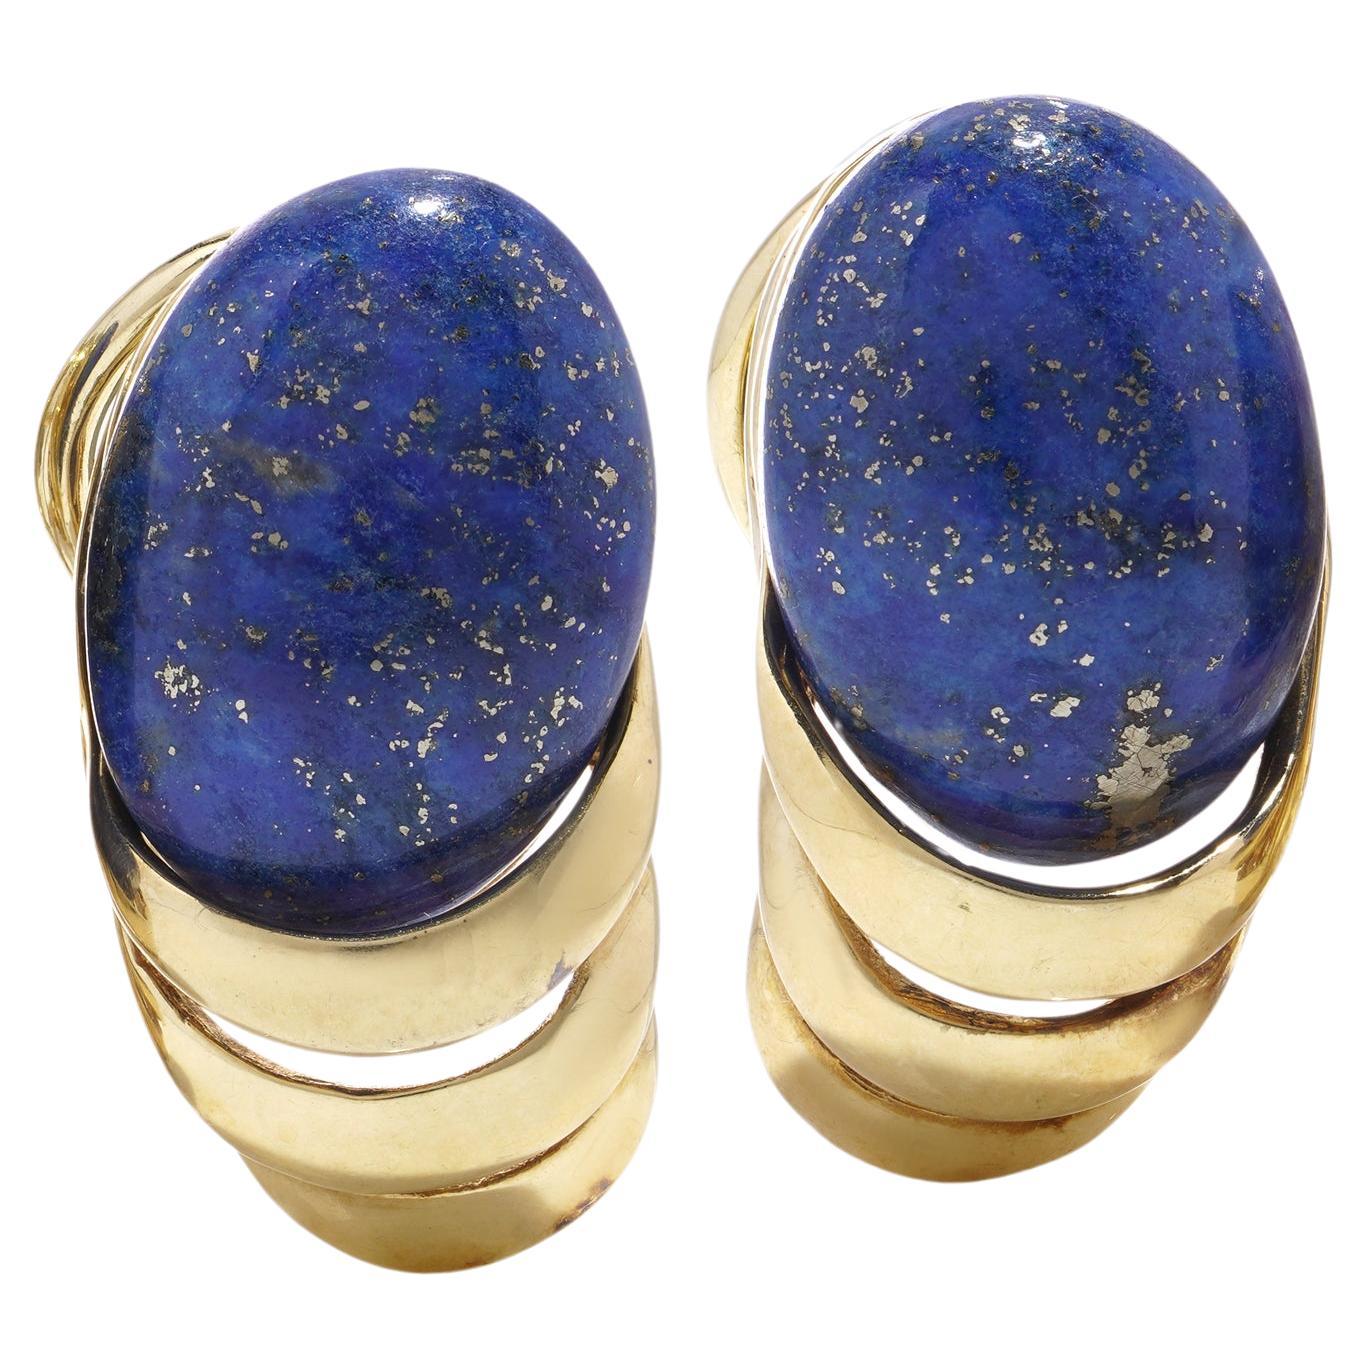  14kt Yellow Gold Clip-On Stud Earrings with Oval Cabochon Lapis Lazuli